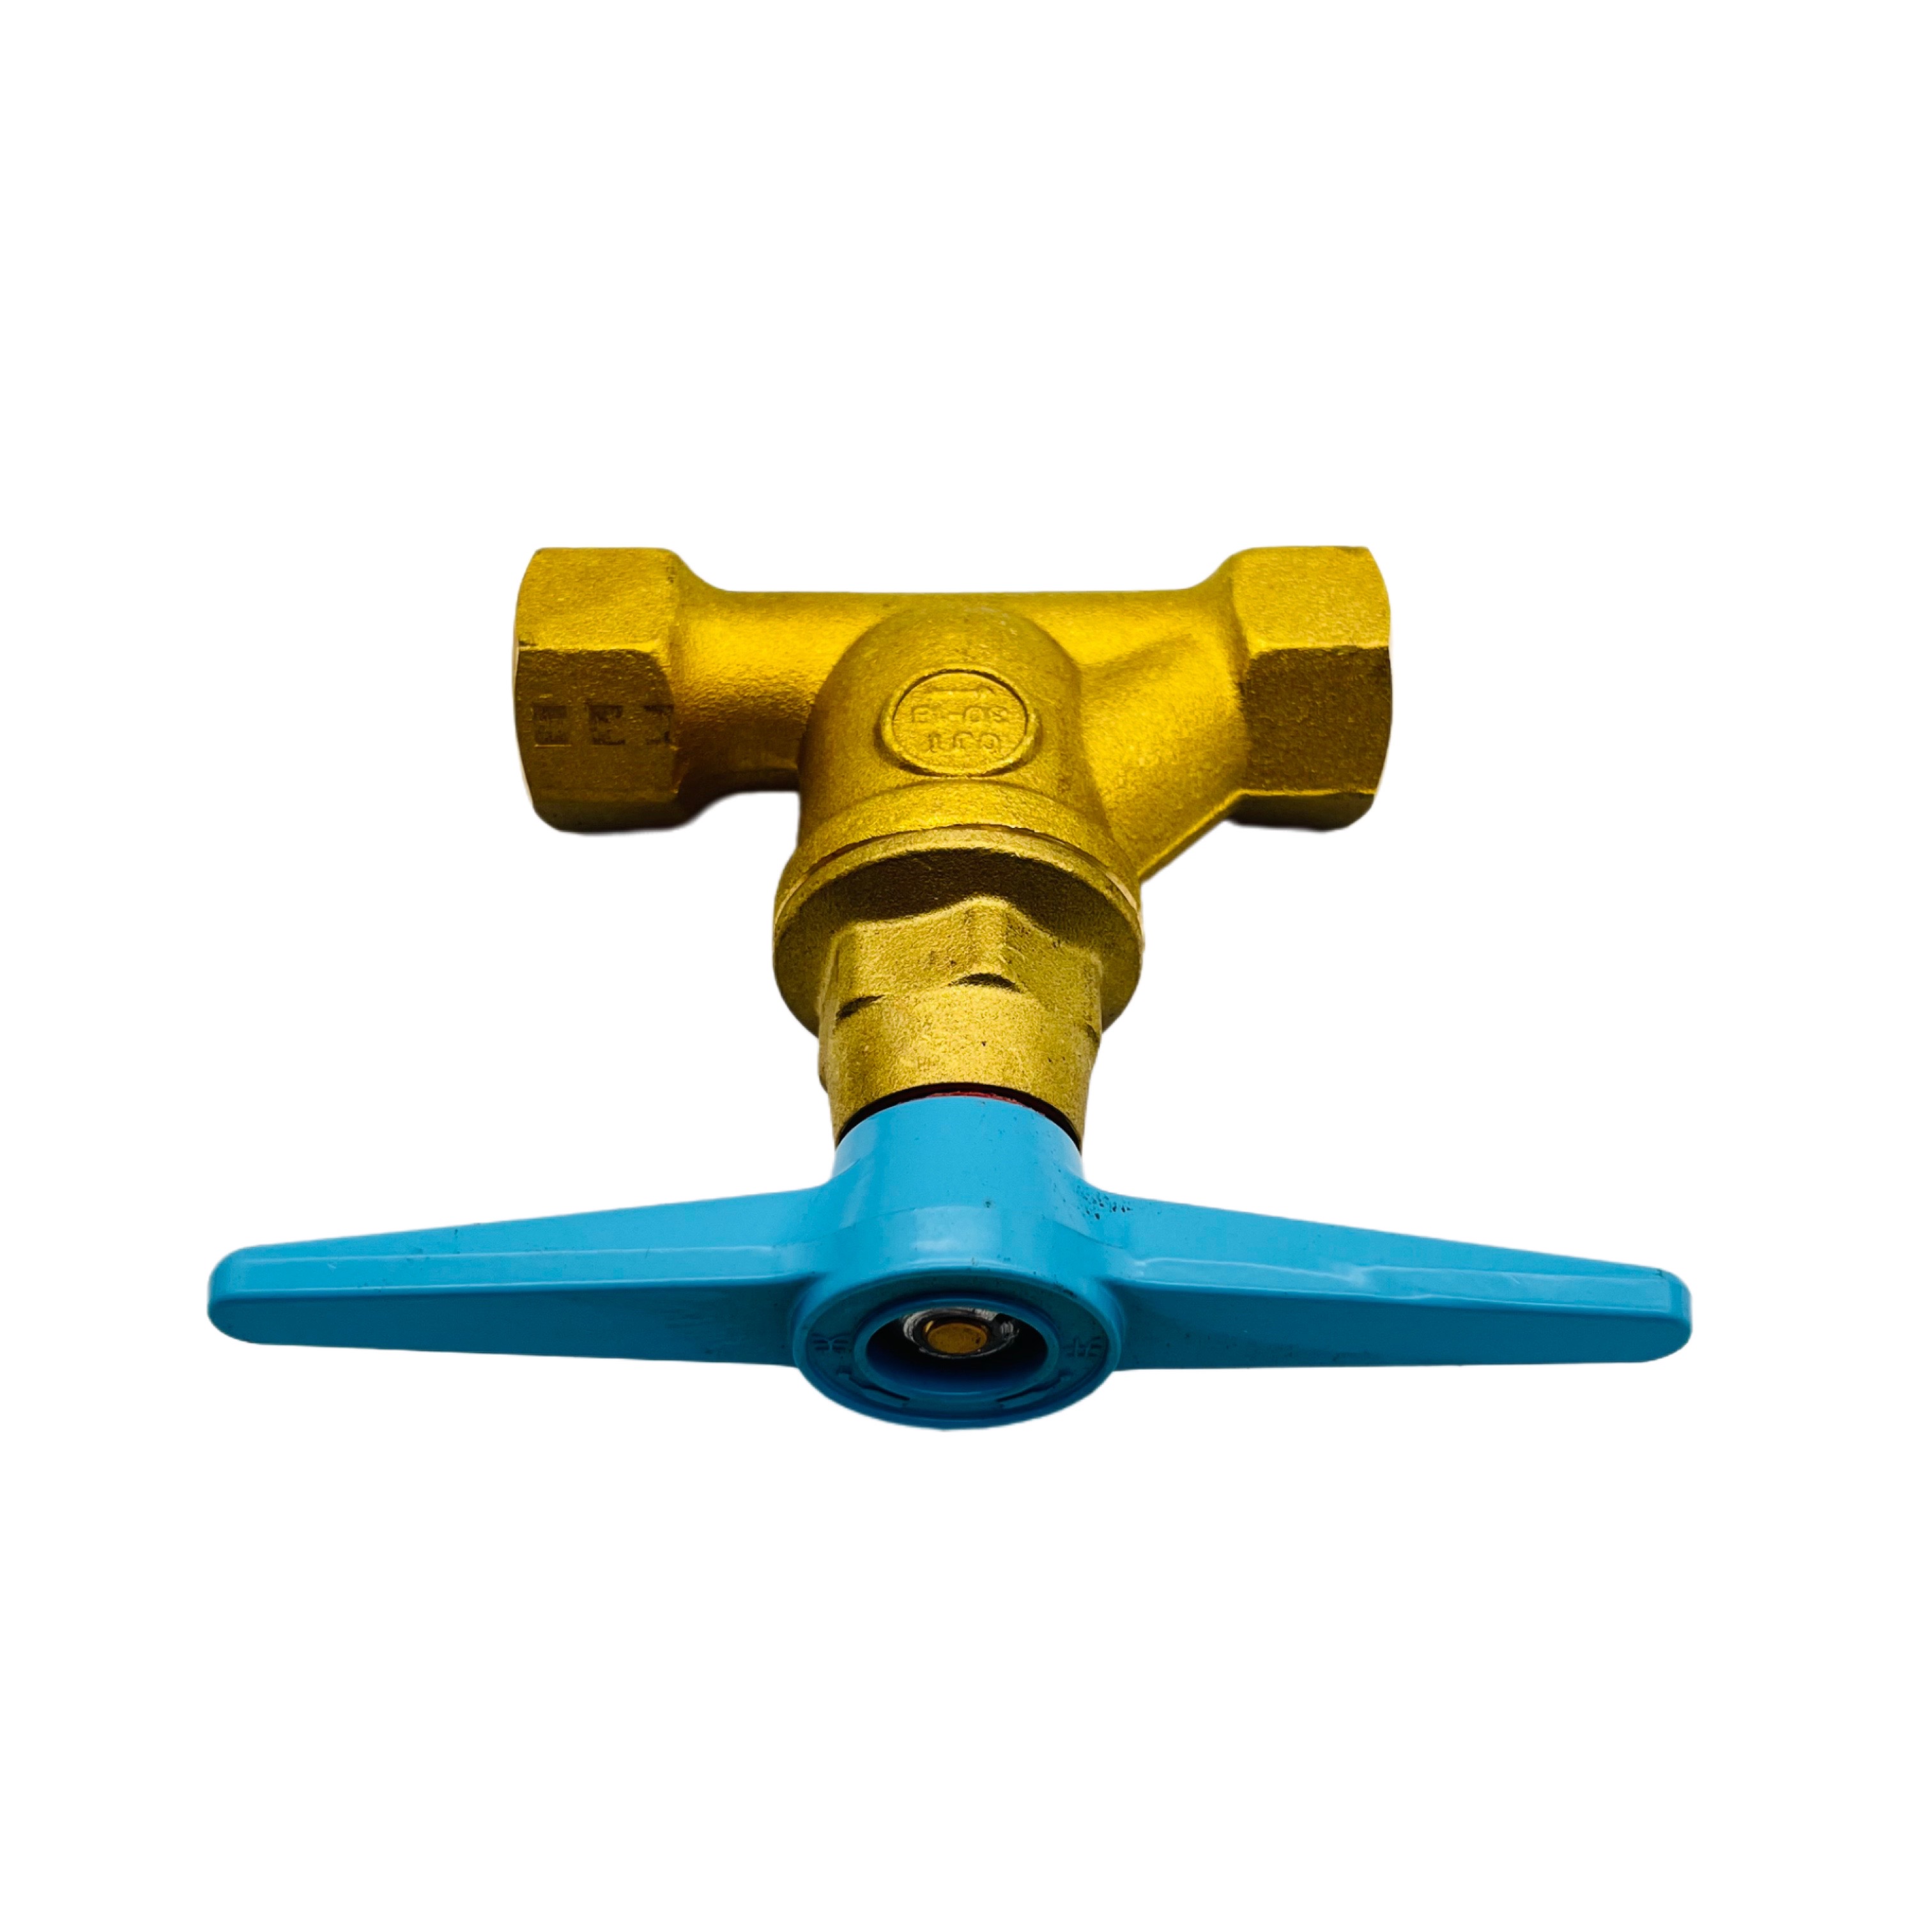 QJT30-18 Industrial Manual Gas Stop Valve for Pipe Connection